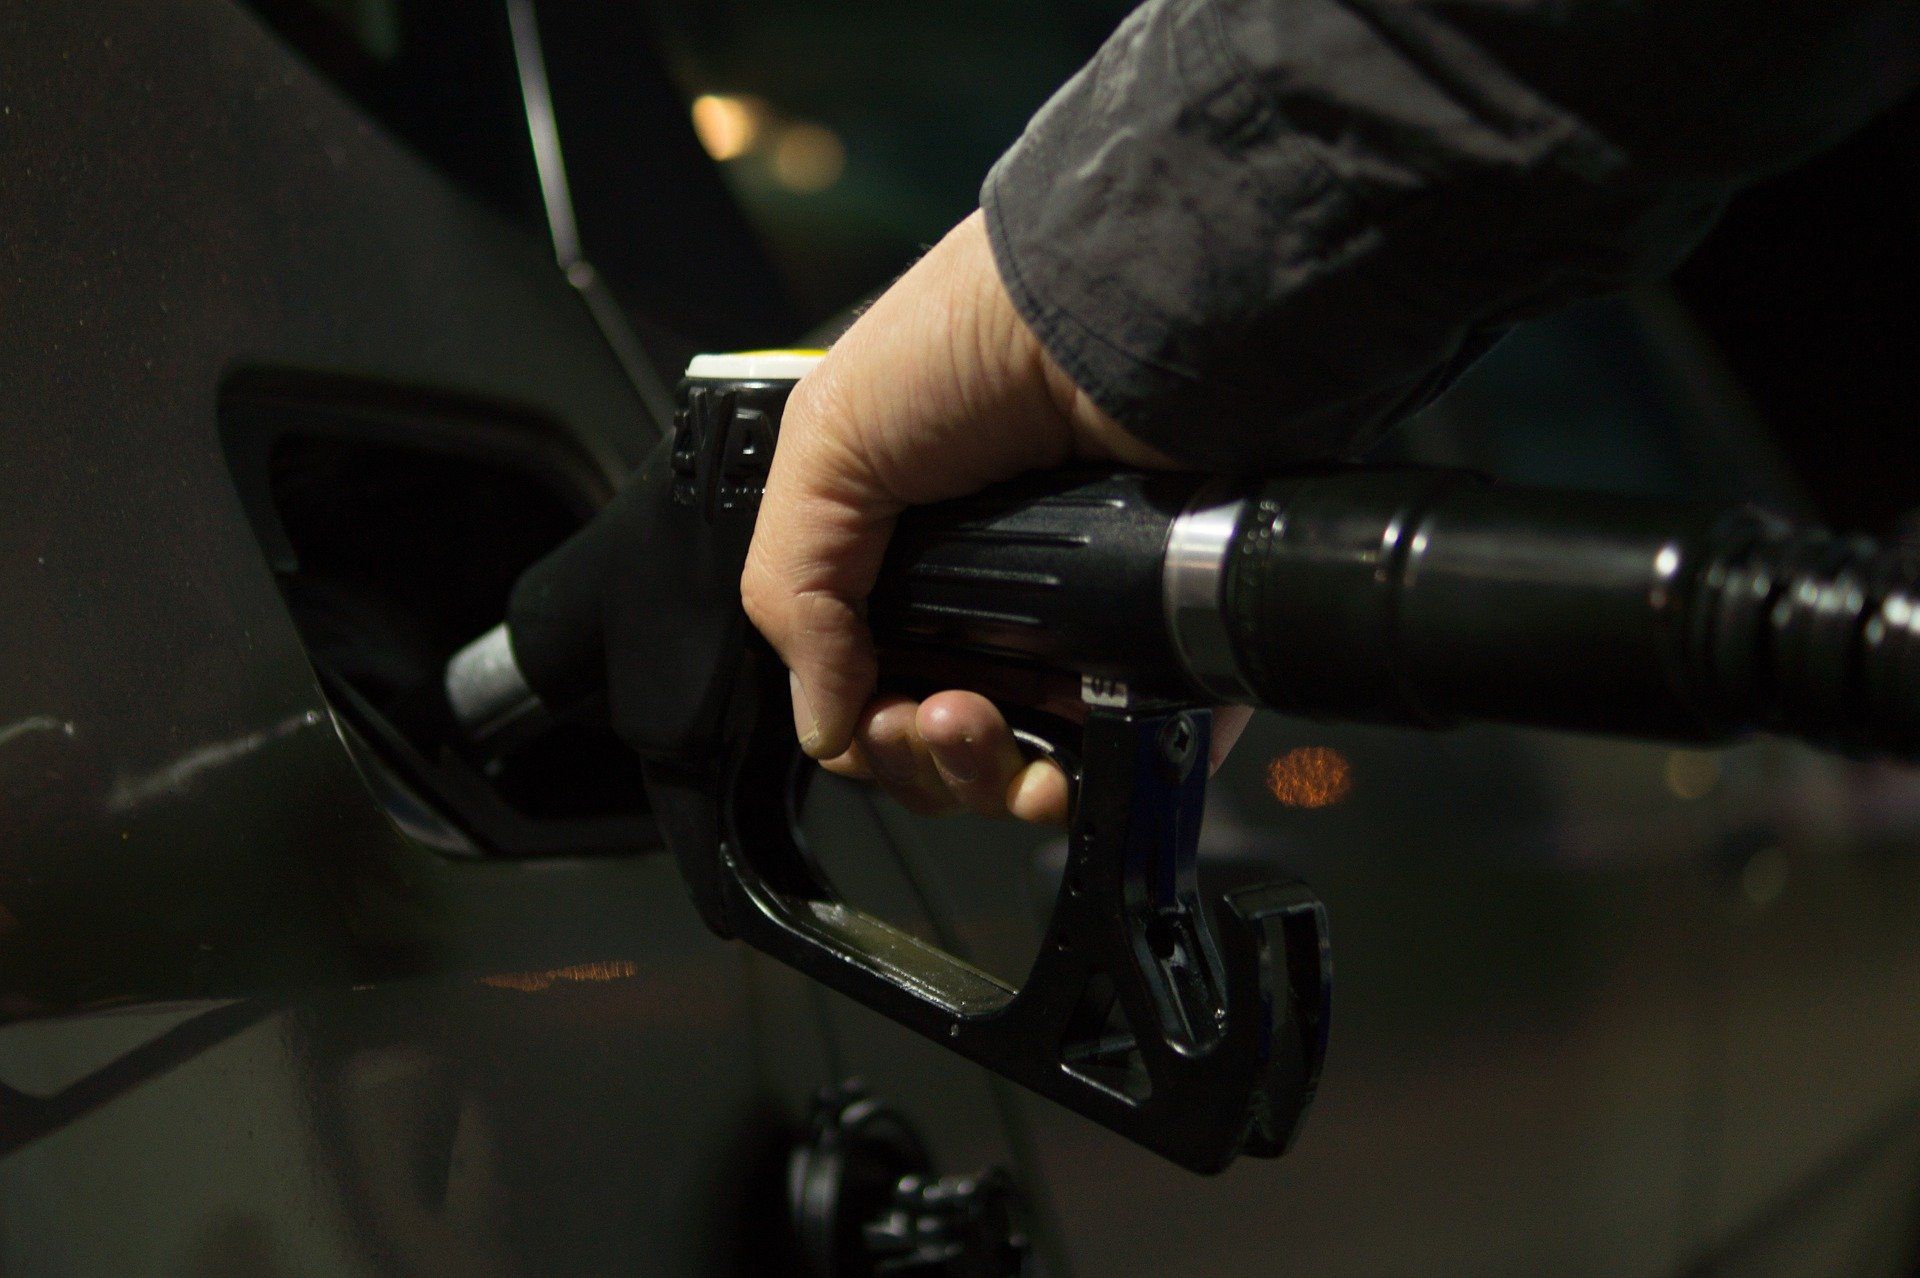 Fuel prices: Petrol priced at Rs 95.41, diesel Rs 86.67 in Delhi on February 10, 2022